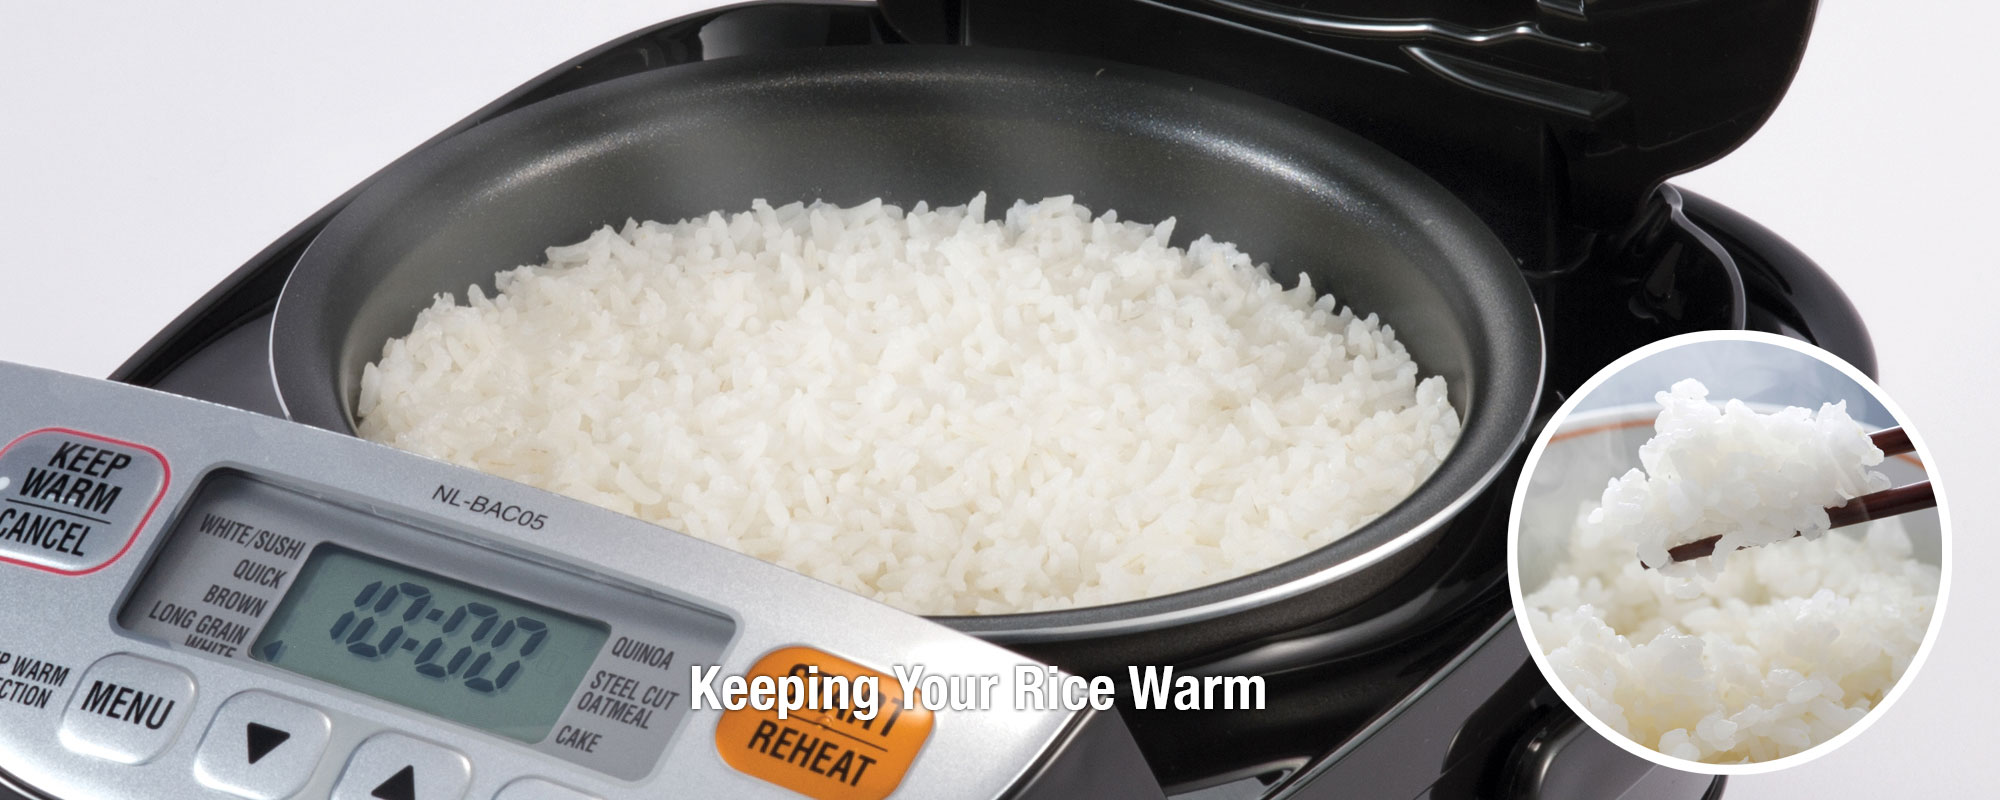 Keeping Your Rice Warm